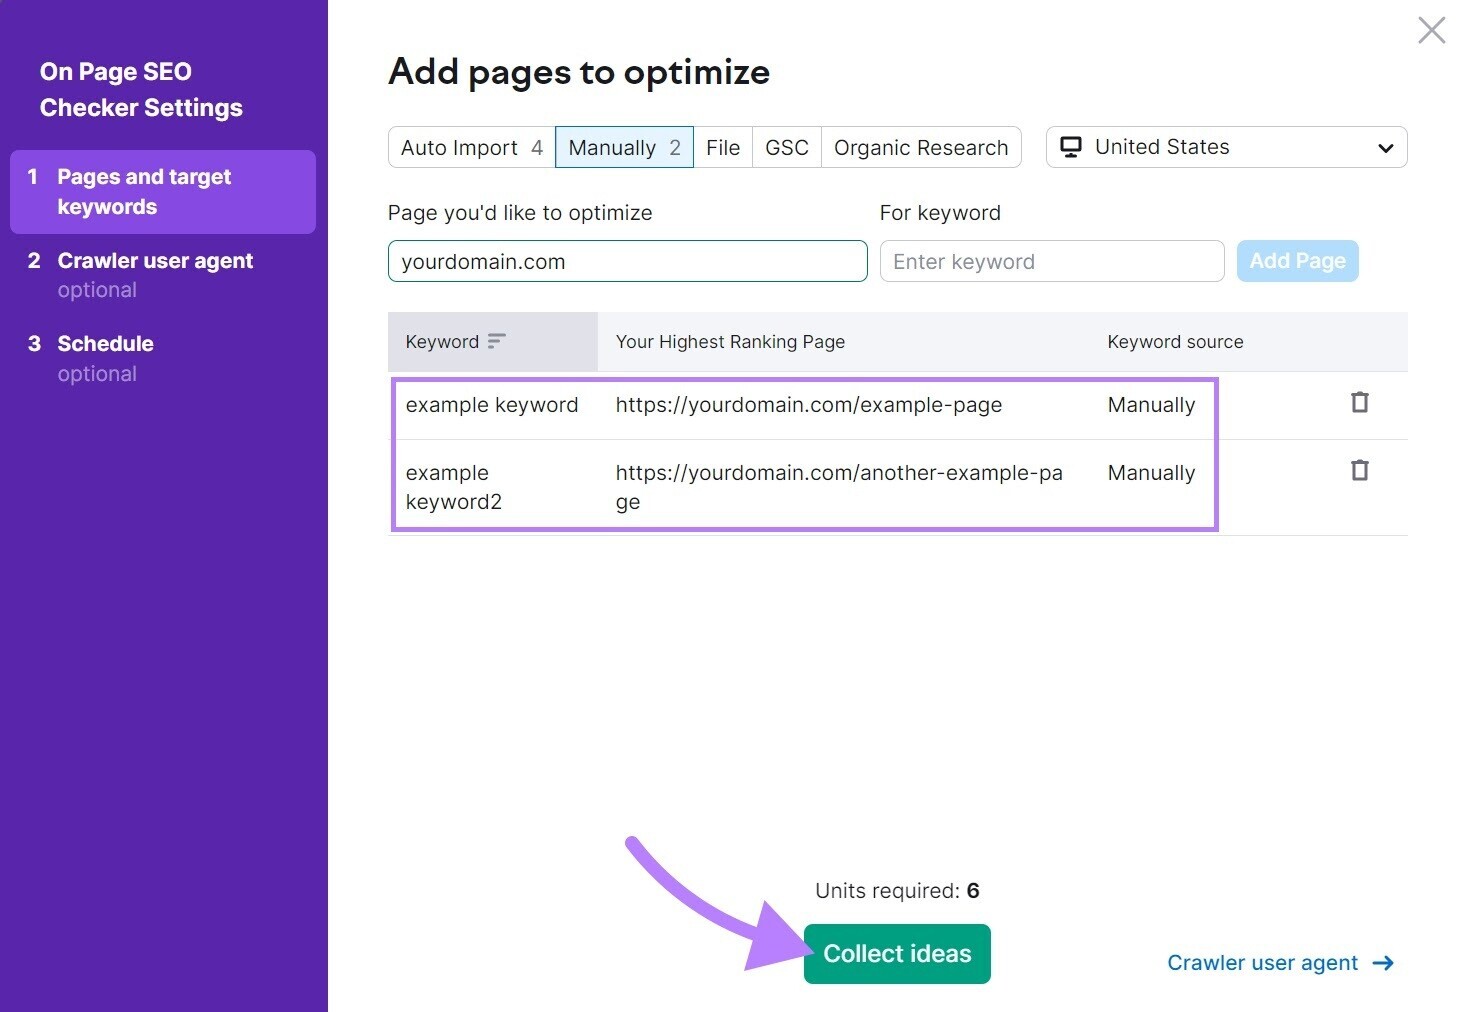 "Add pages to optimize" window in On Page SEO Checker Settings